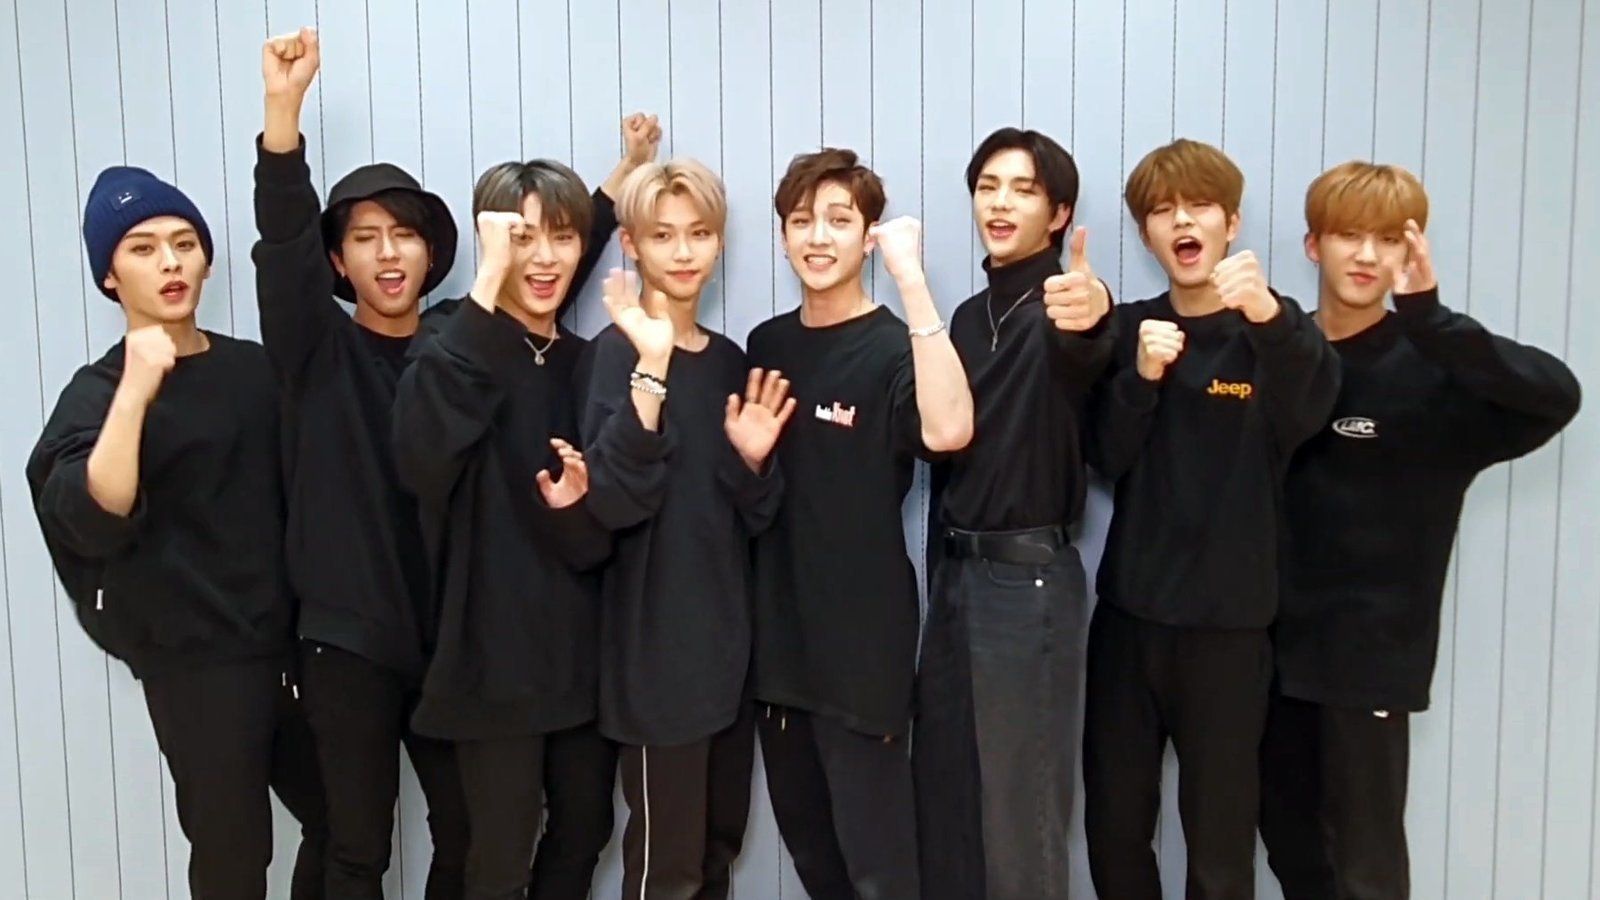 Petition · Petition to get ot8 songs of every StrayKids song · Change.org